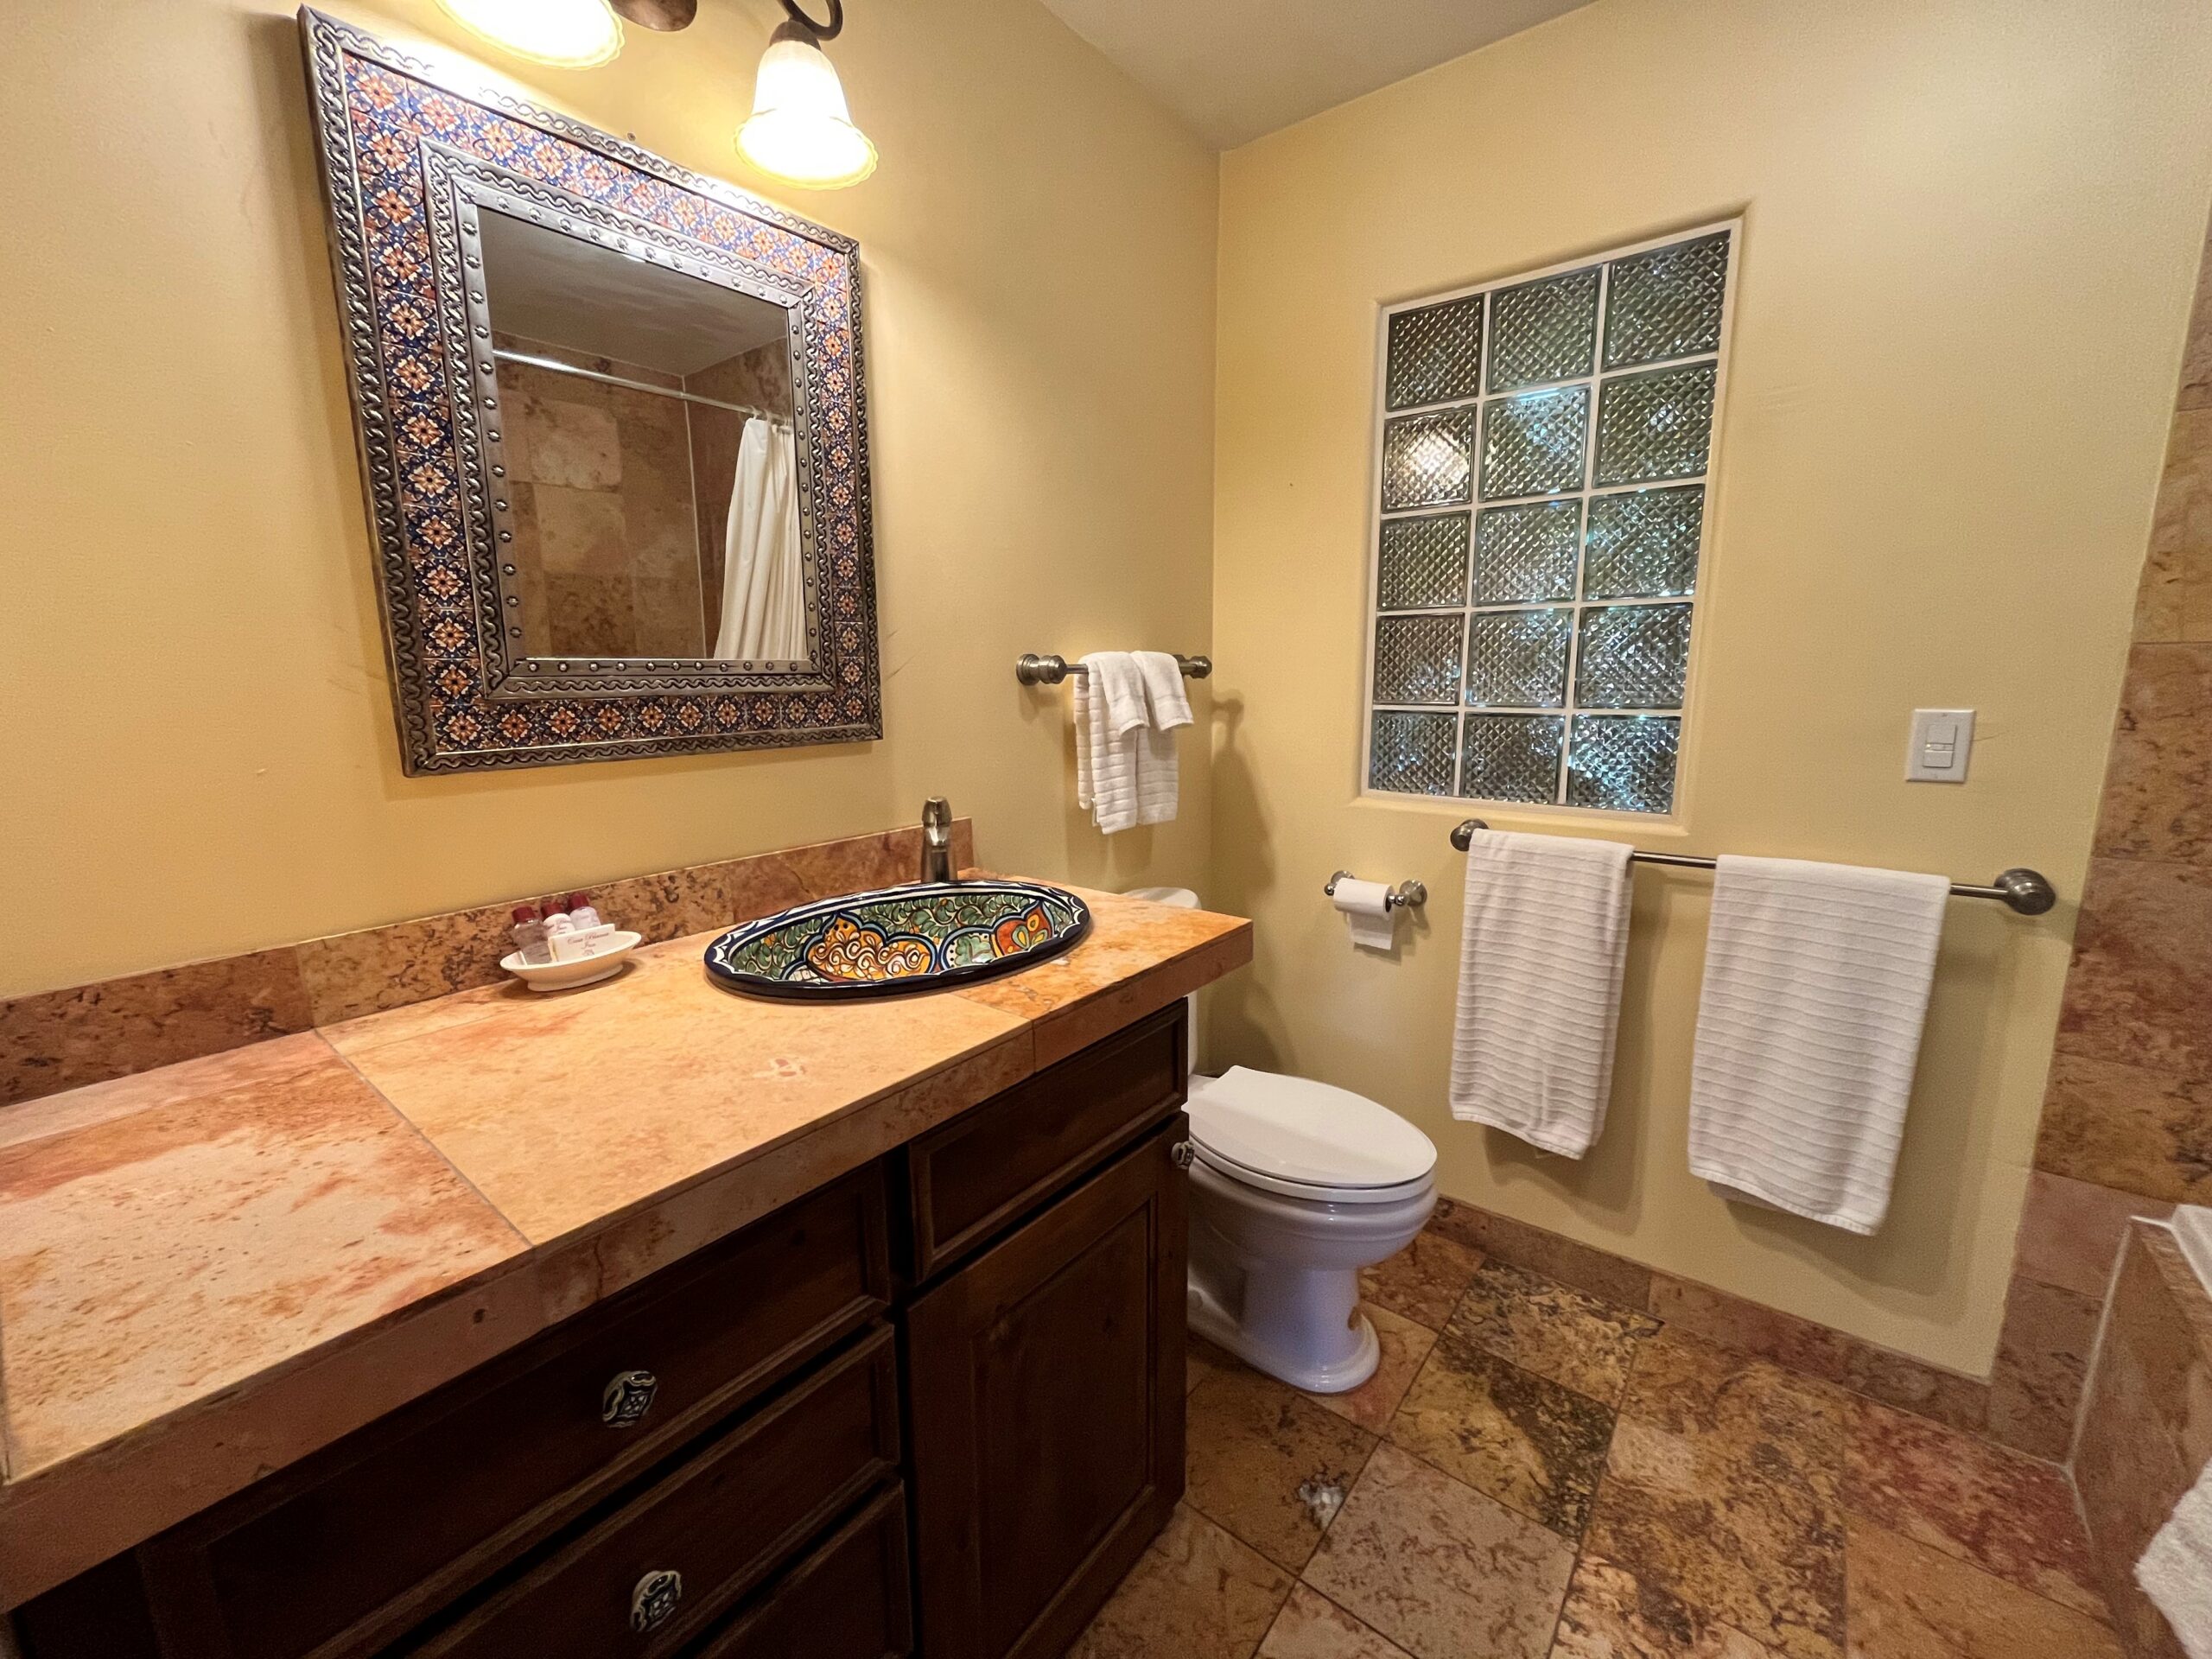 Bathroom vanity with travertine countertops and hand painted Mexican sink.